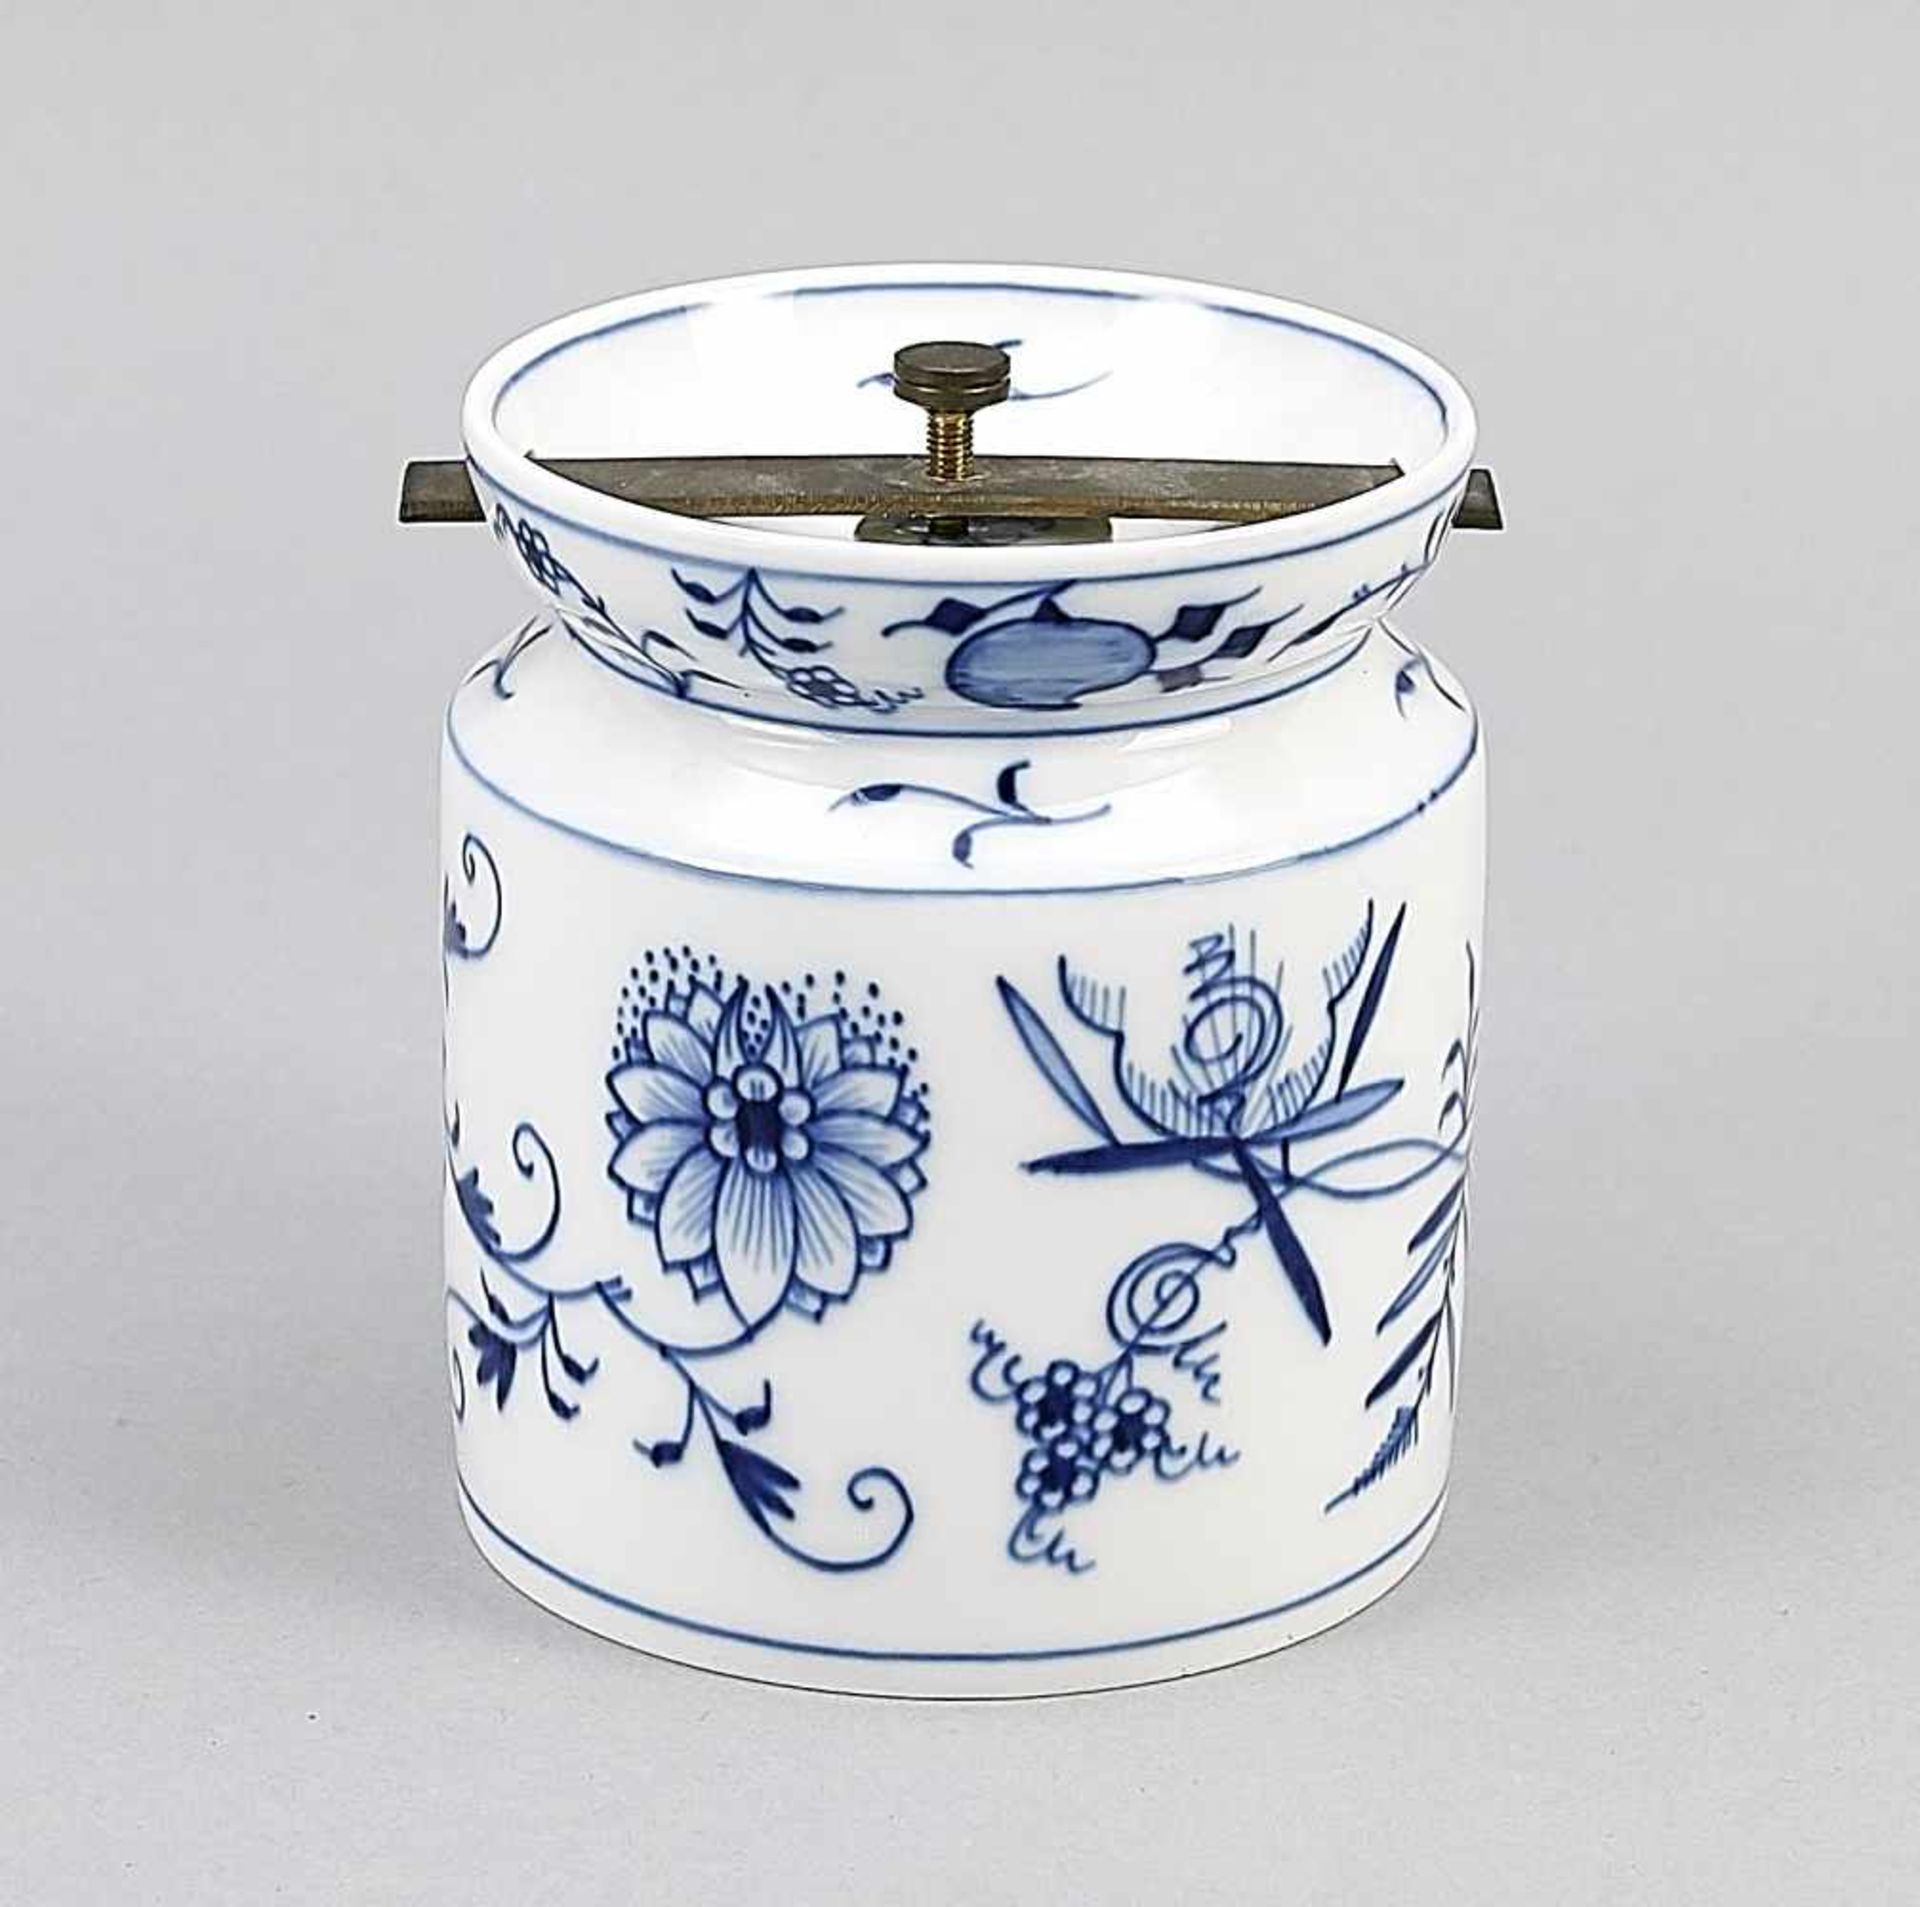 Round tea / tobacco box, Meissen, mark 1970s, 2nd quality, cylindrical shape with recessed